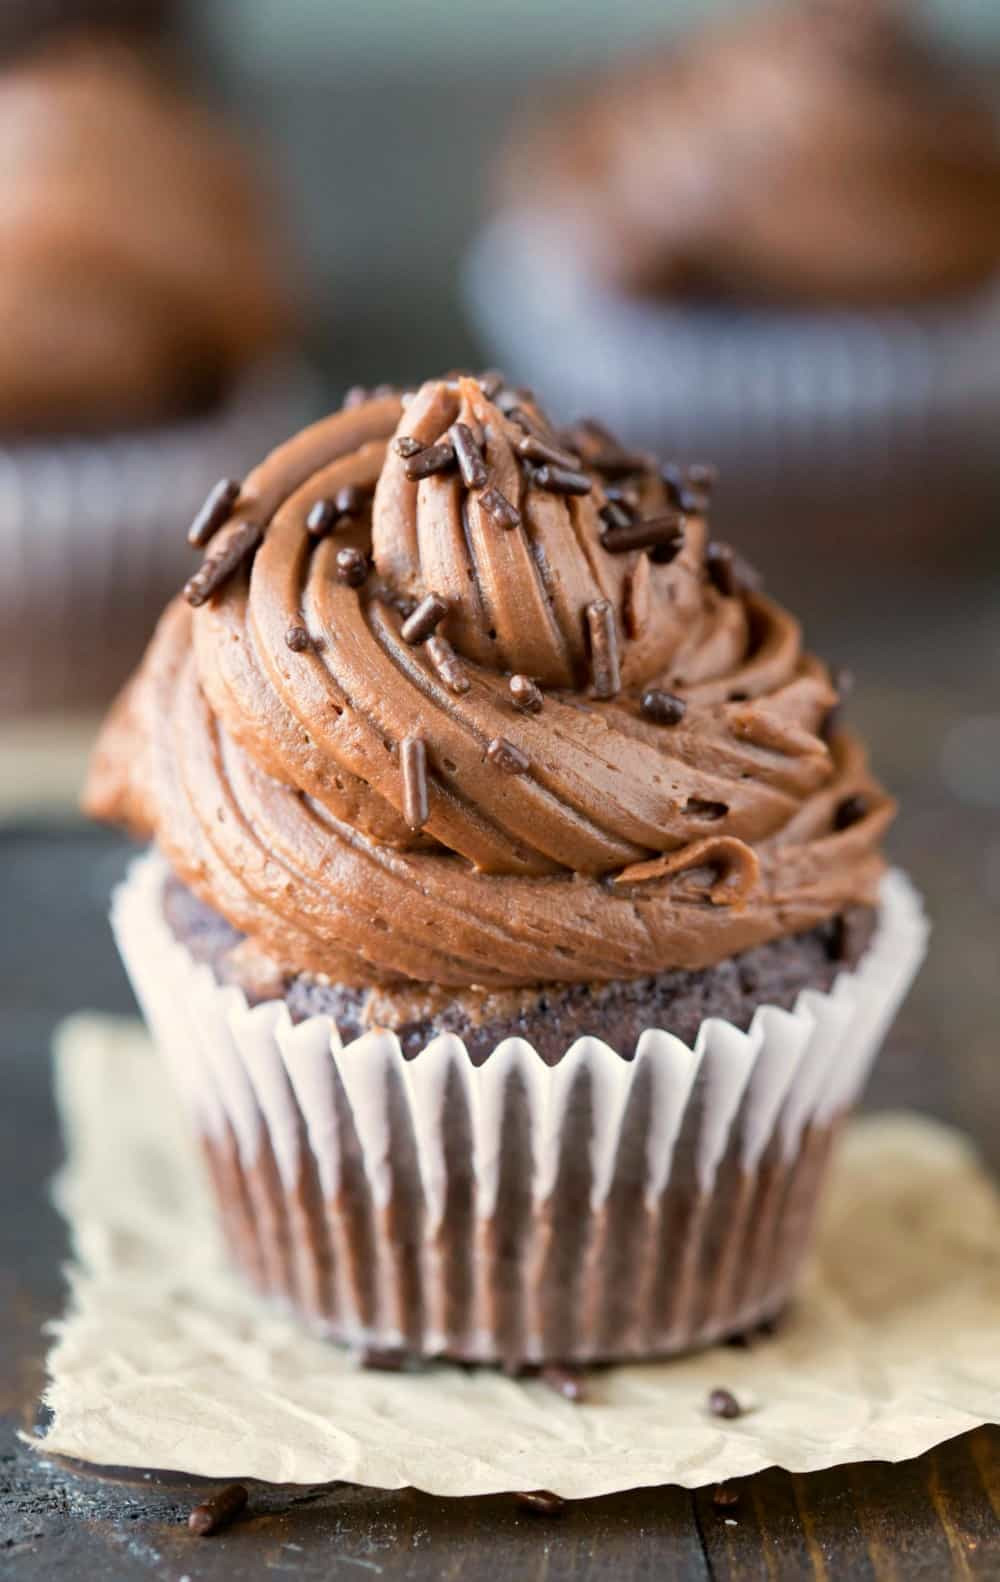 Chocolate Frosting Recipes
 Chocolate Buttercream Frosting I Heart Eating